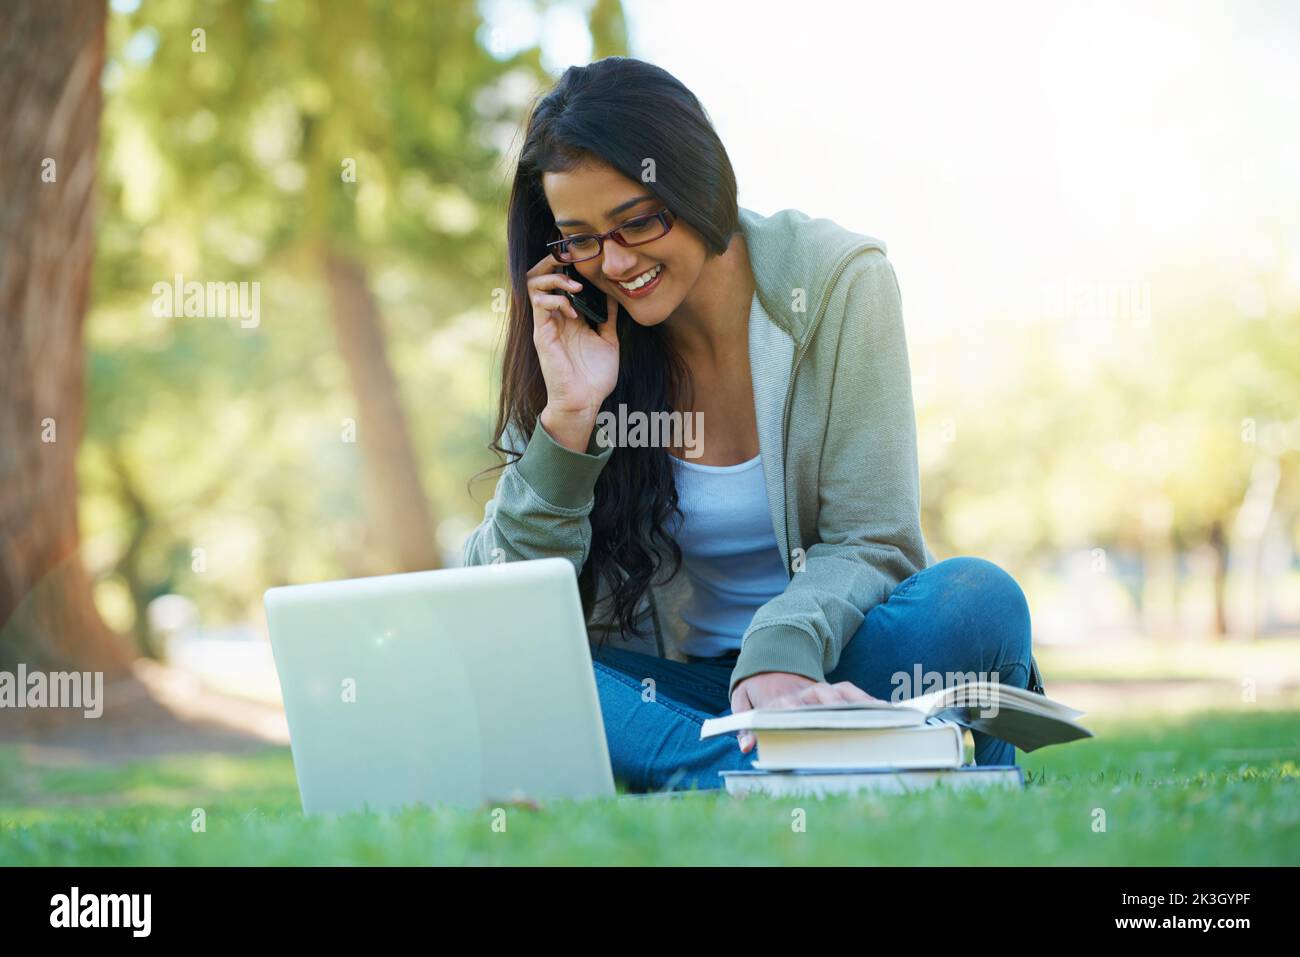 Meet me in the park for a study session. A young student speaking on her cell while sitting in the park with a laptop and testbooks. Stock Photo